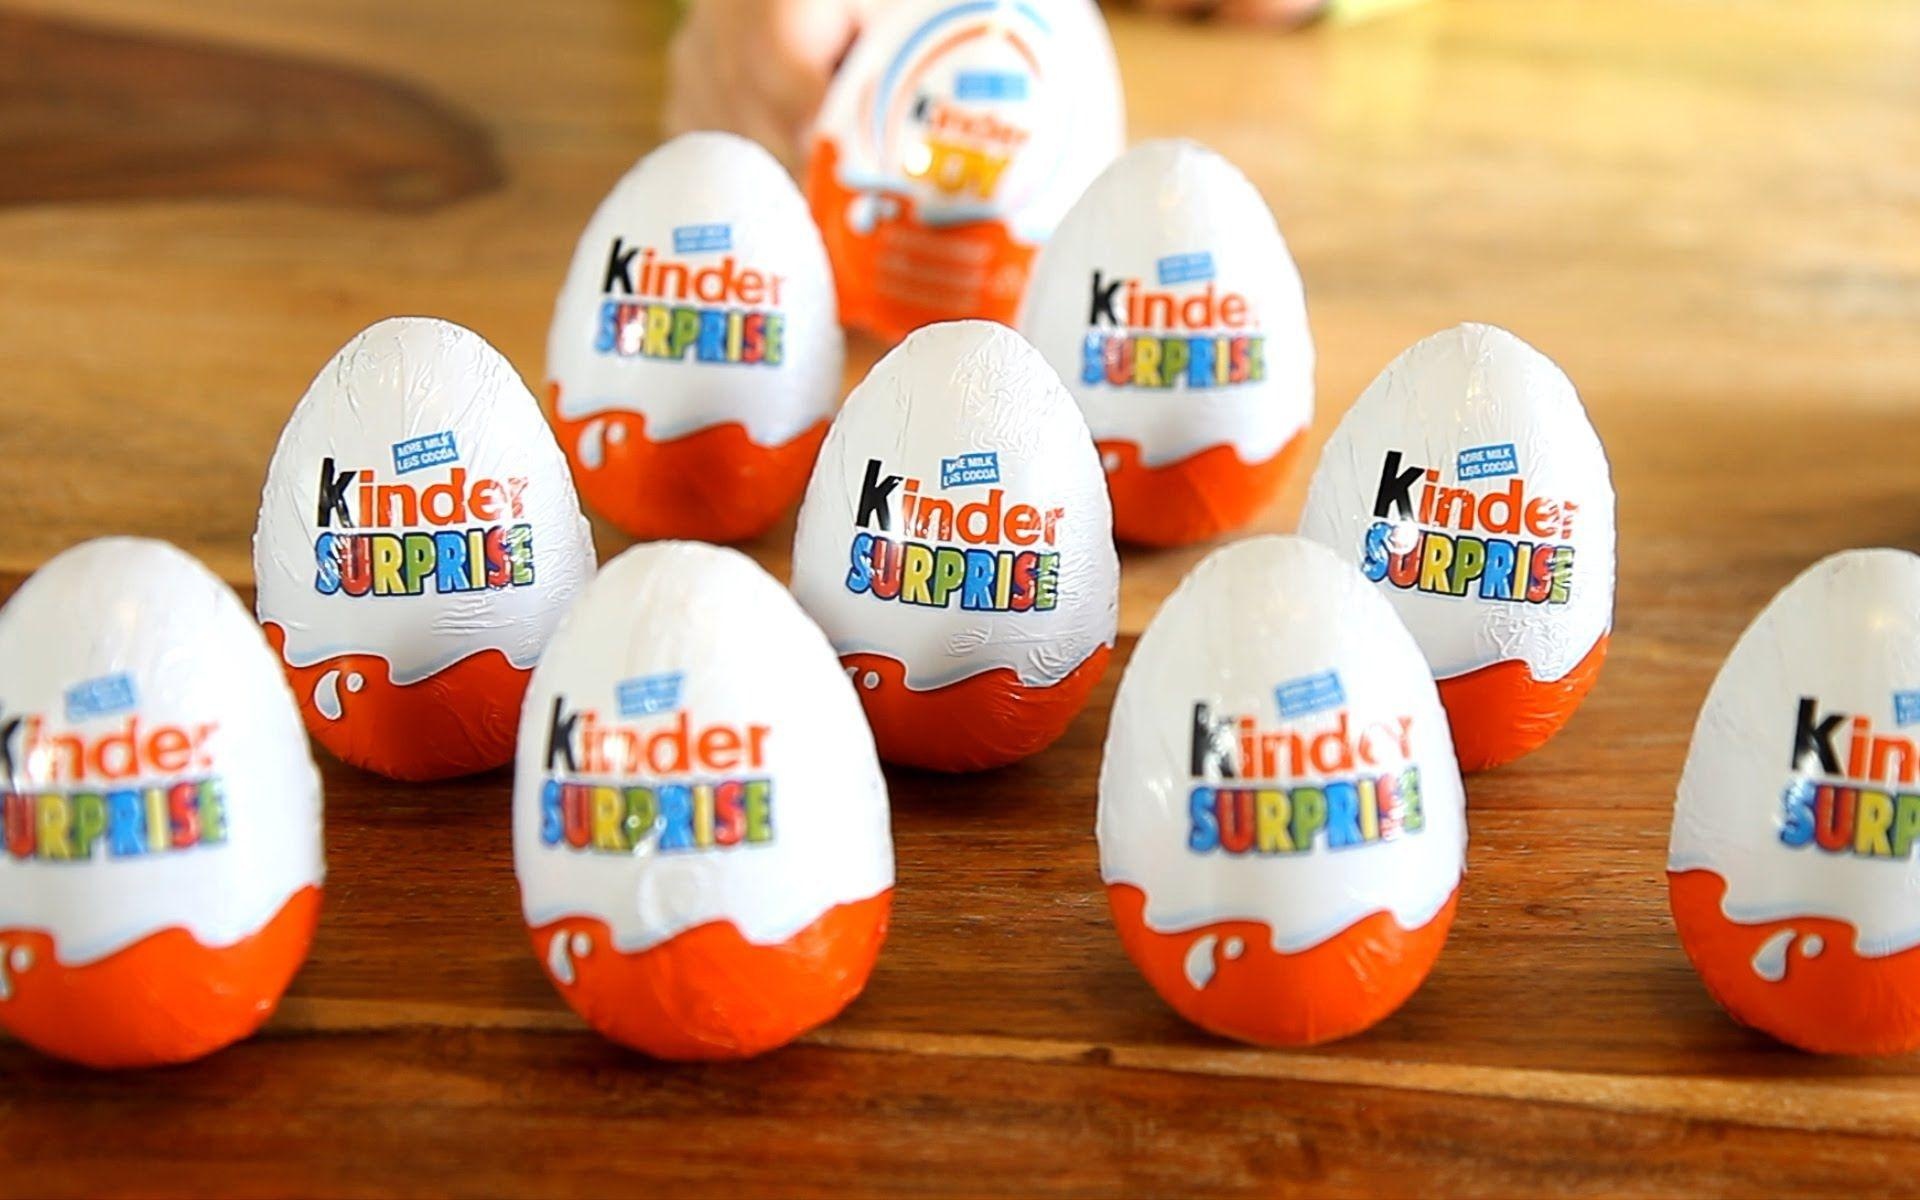 Kinder (Brand): A special treat, Produced by Ferrero since 1974. 1920x1200 HD Background.